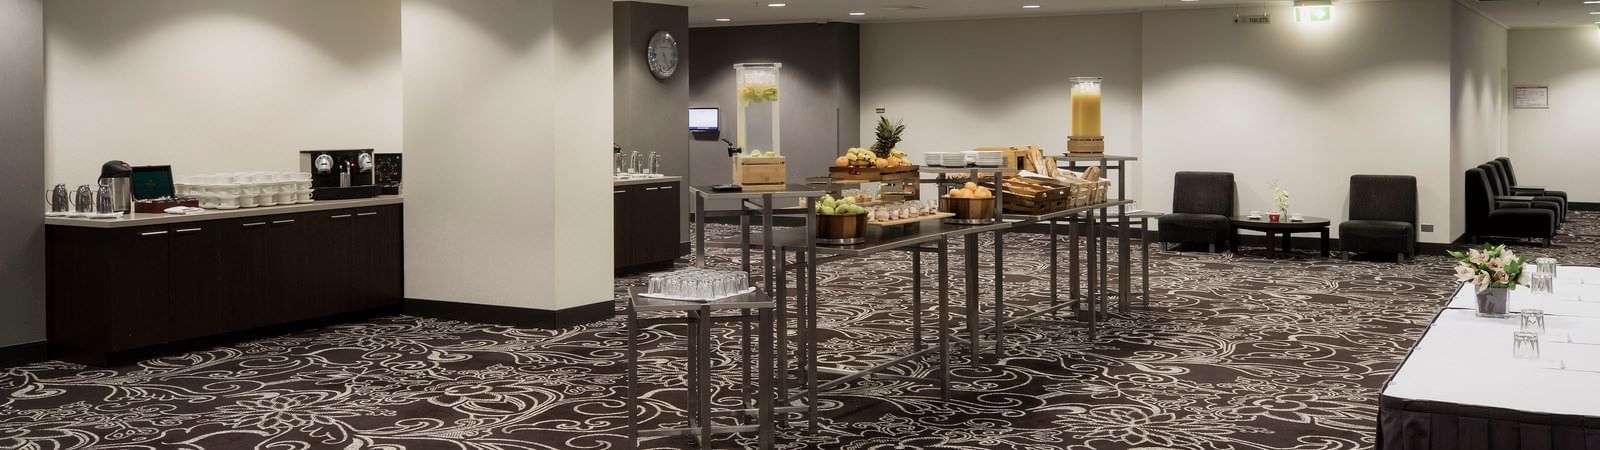 Refreshments served in meeting at Novotel Melbourne On Collins